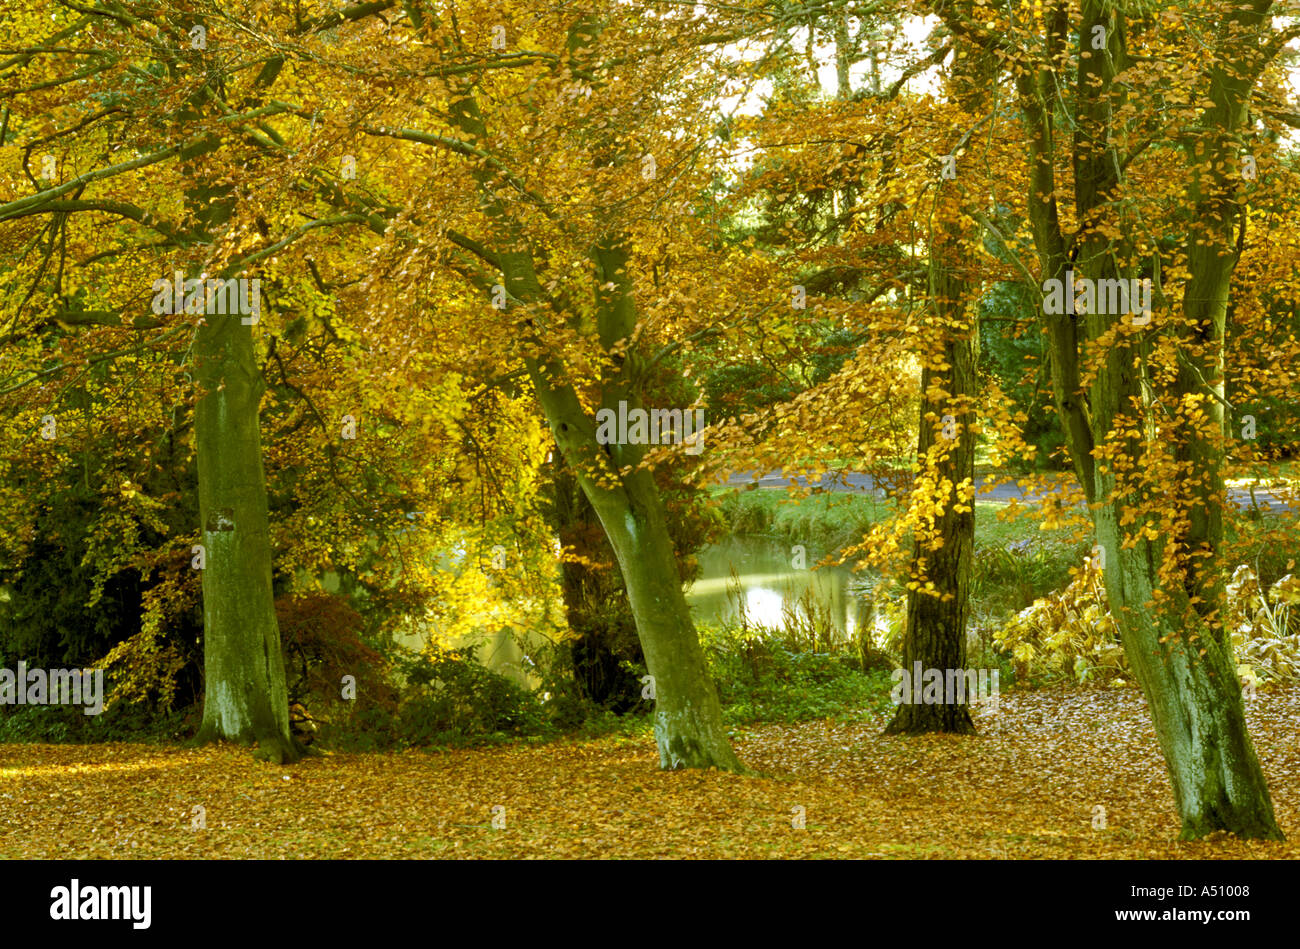 BUCHE IM HERBST WHIRLOW HALL PARK SHEFFIELD SOUTH YORKSHIRE ENGLAND Stockfoto